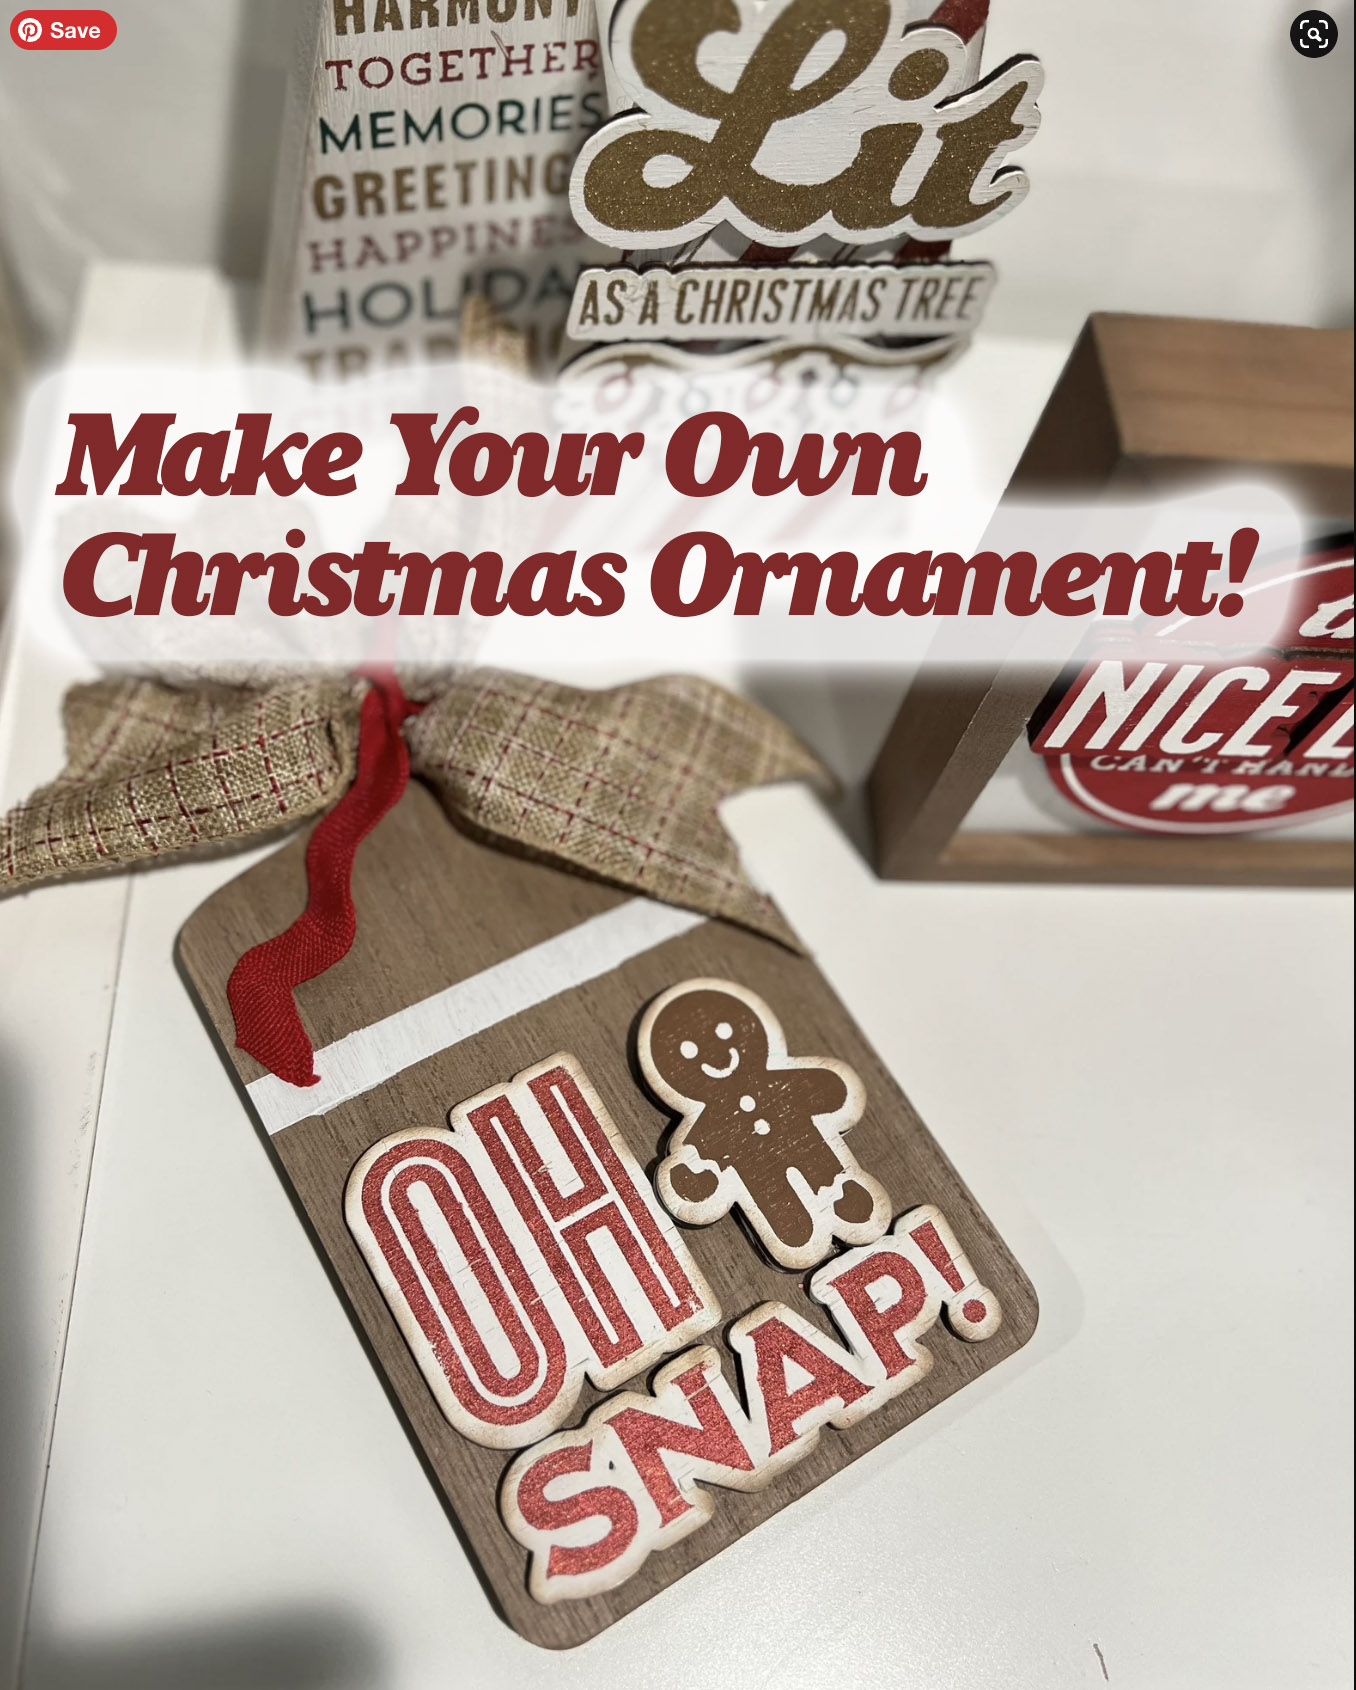 Make Your Own Fun and Easy Christmas Ornaments.